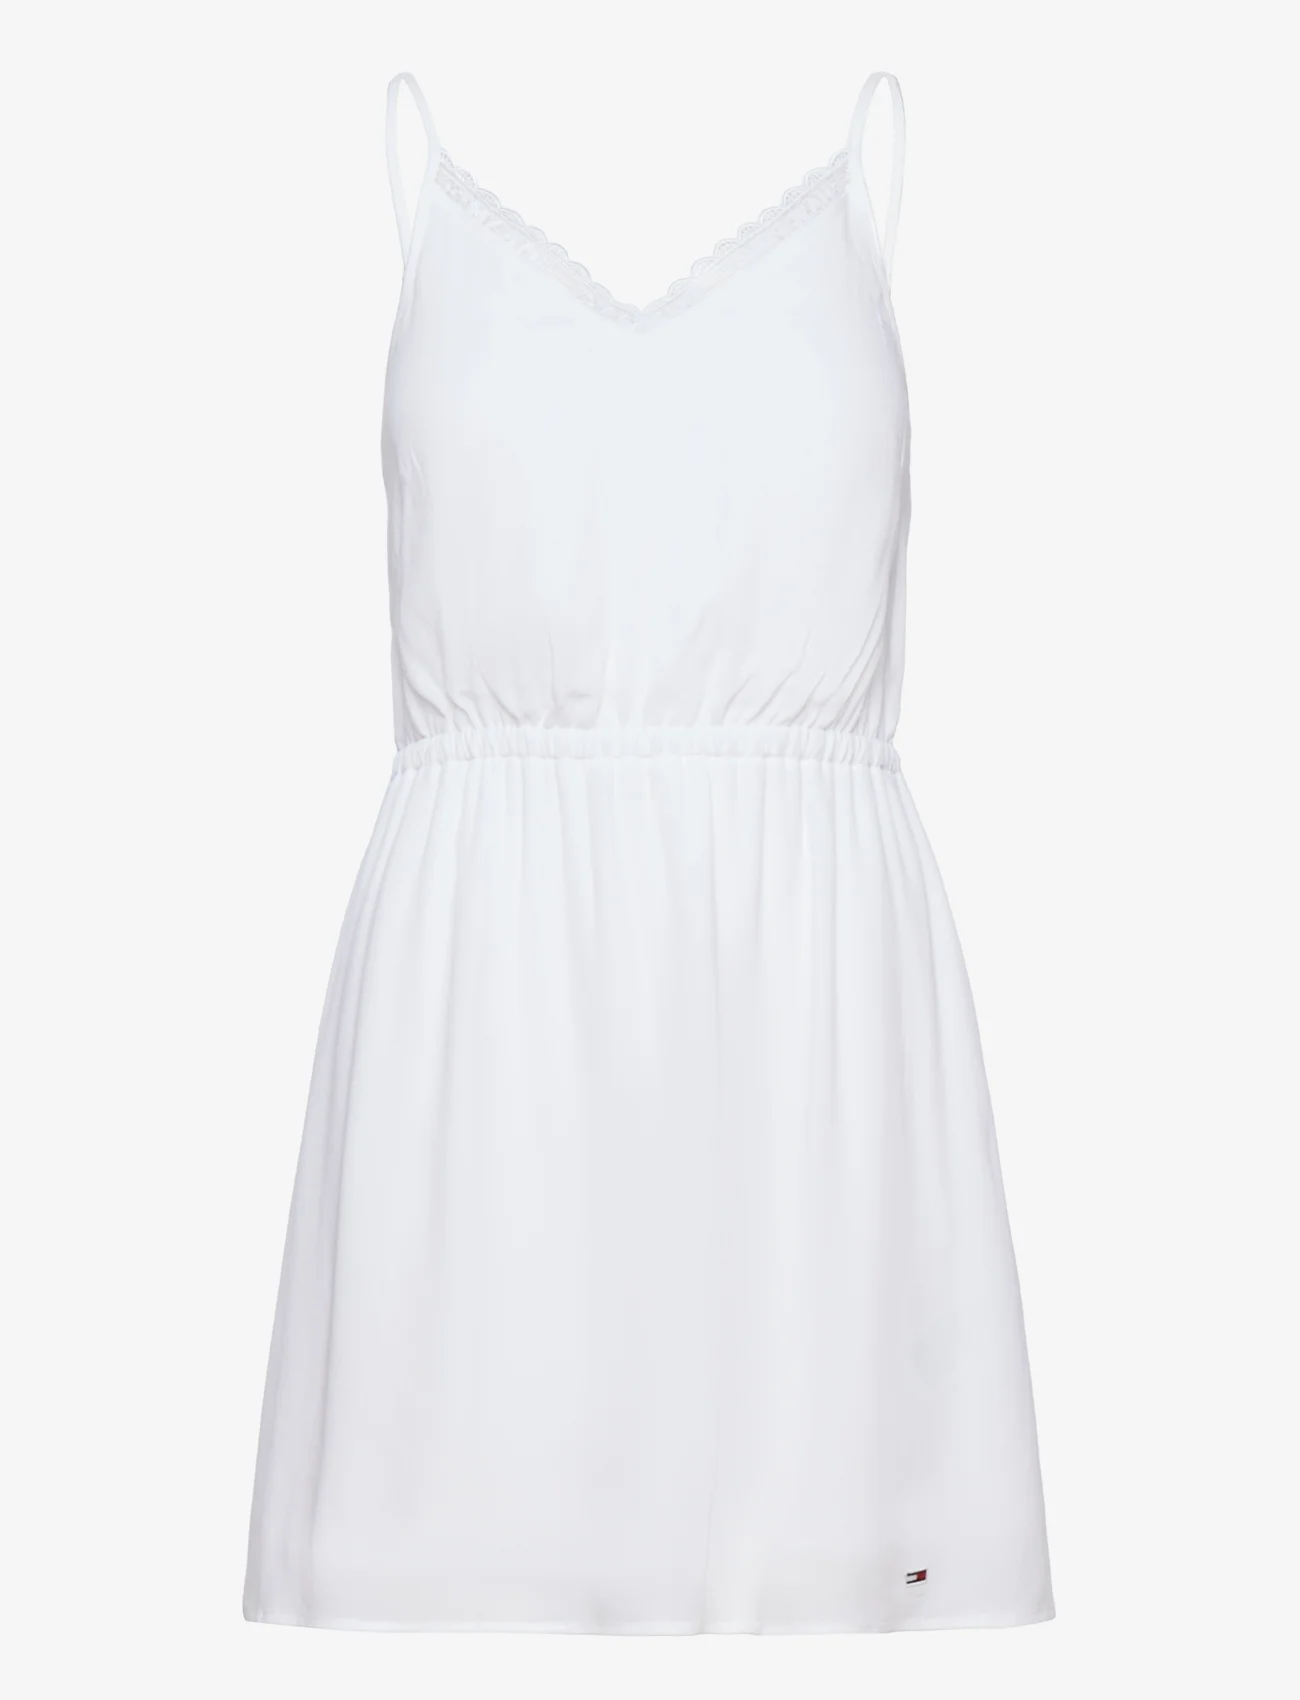 Tommy Jeans - TJW ESSENTIAL LACE STRAP DRESS - t-shirt-kleider - white - 0